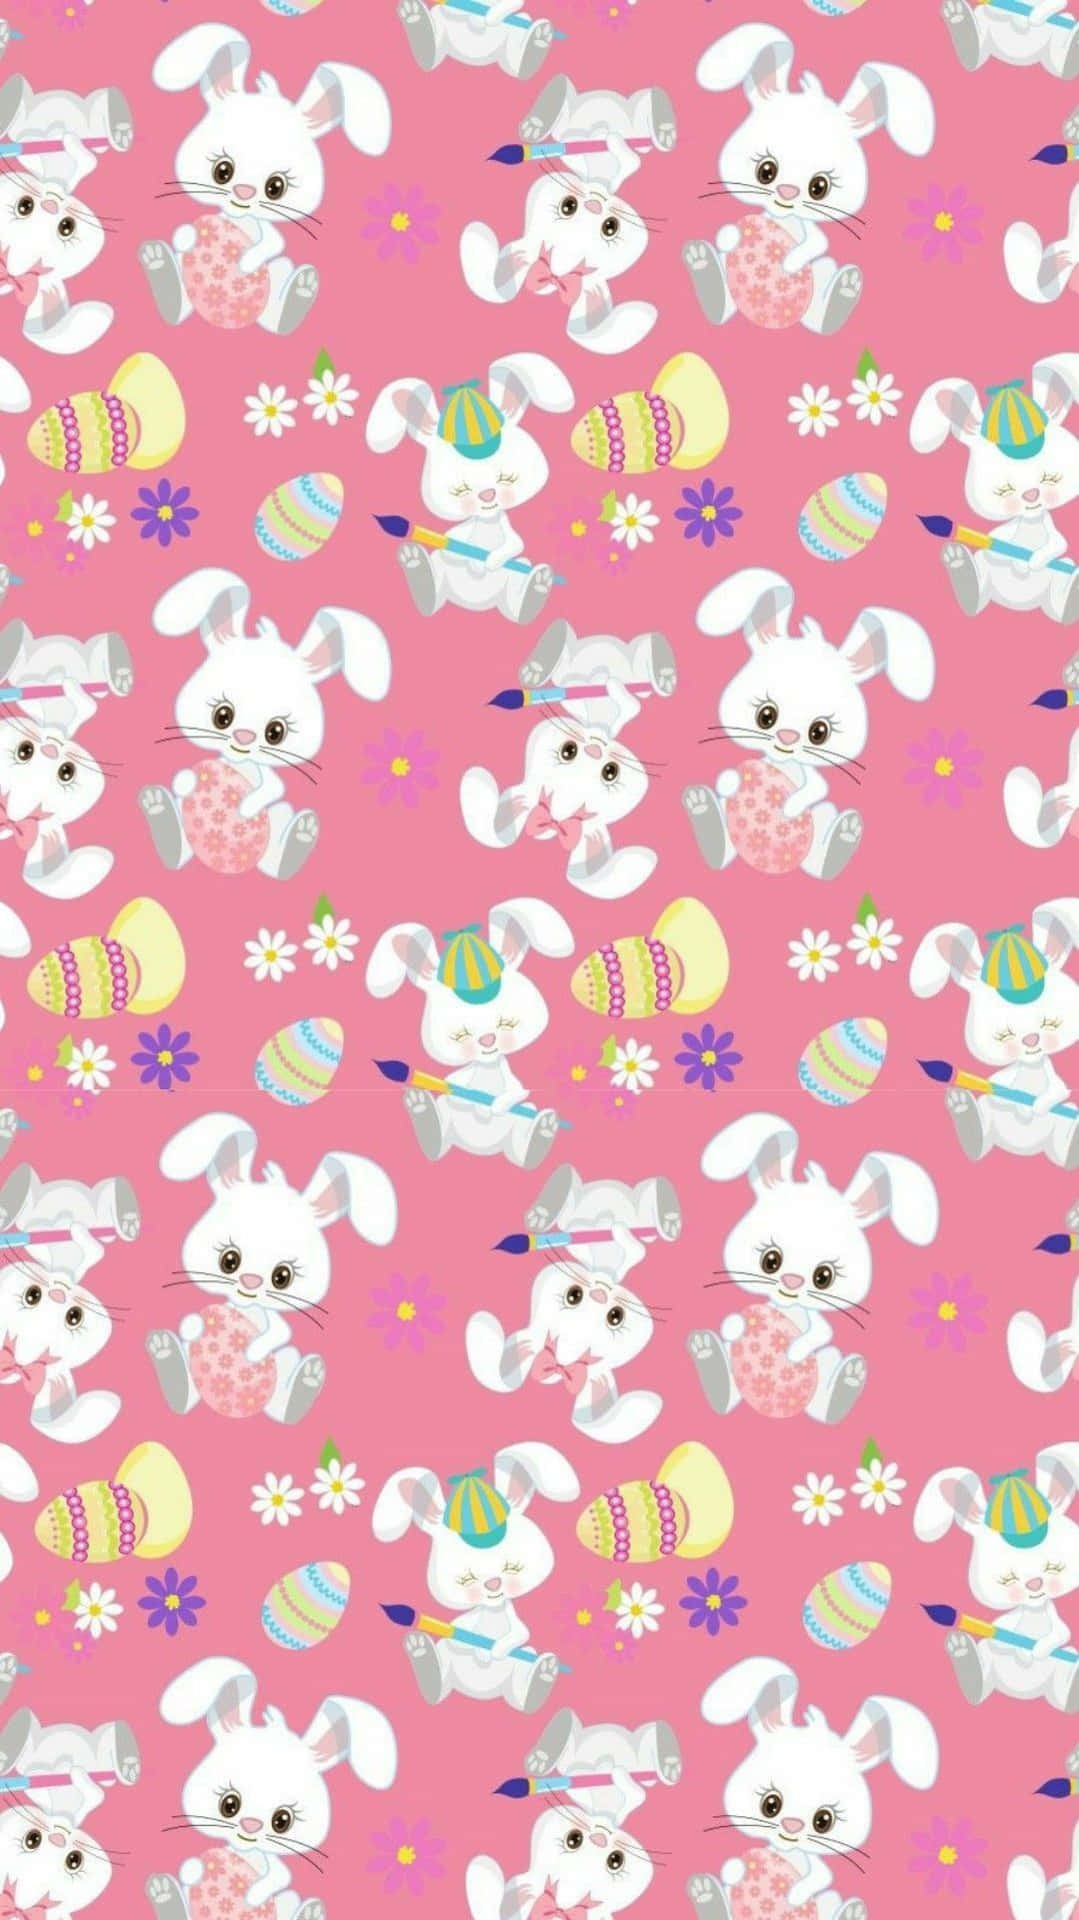 Cute Easter Iphone With Bunnies With Hats Wallpaper